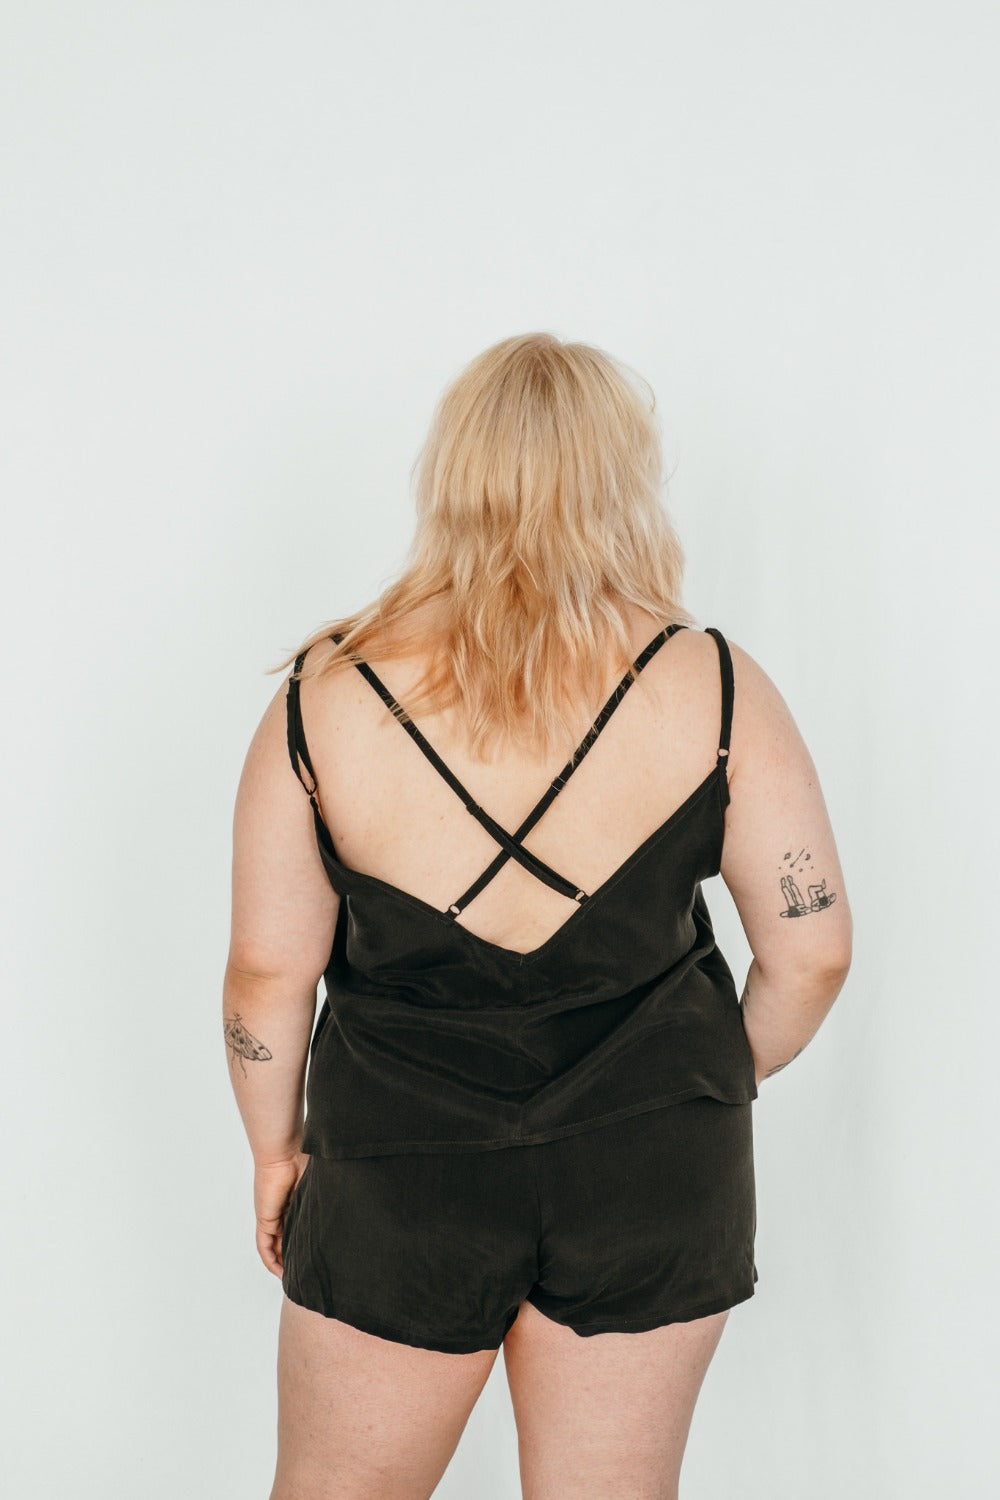 Plus size model wears top with big back neckline and short shorts